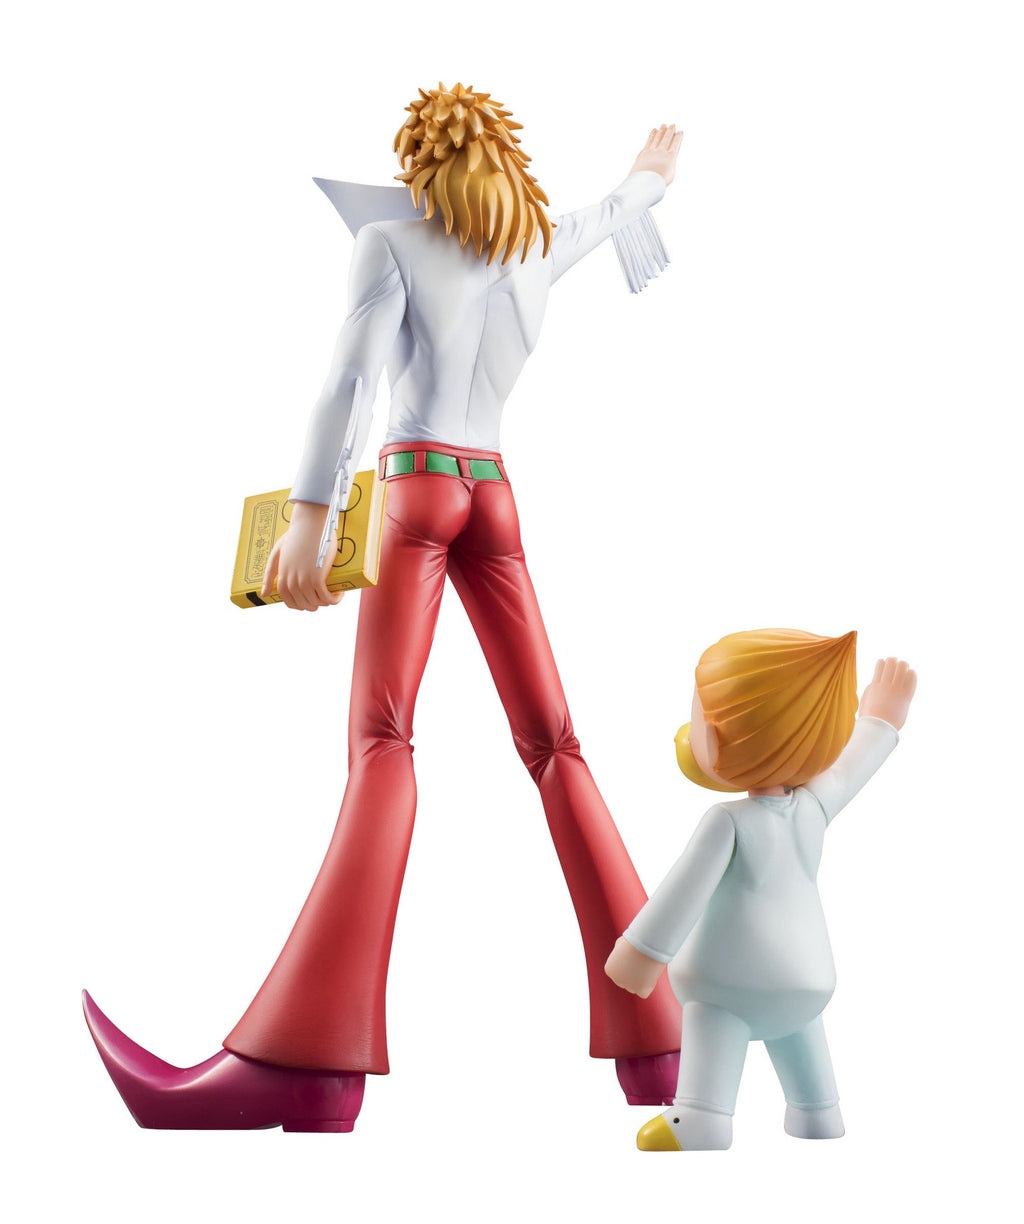 Adorable Figures of Kanchome & Parco Folgore from Zatch Bell